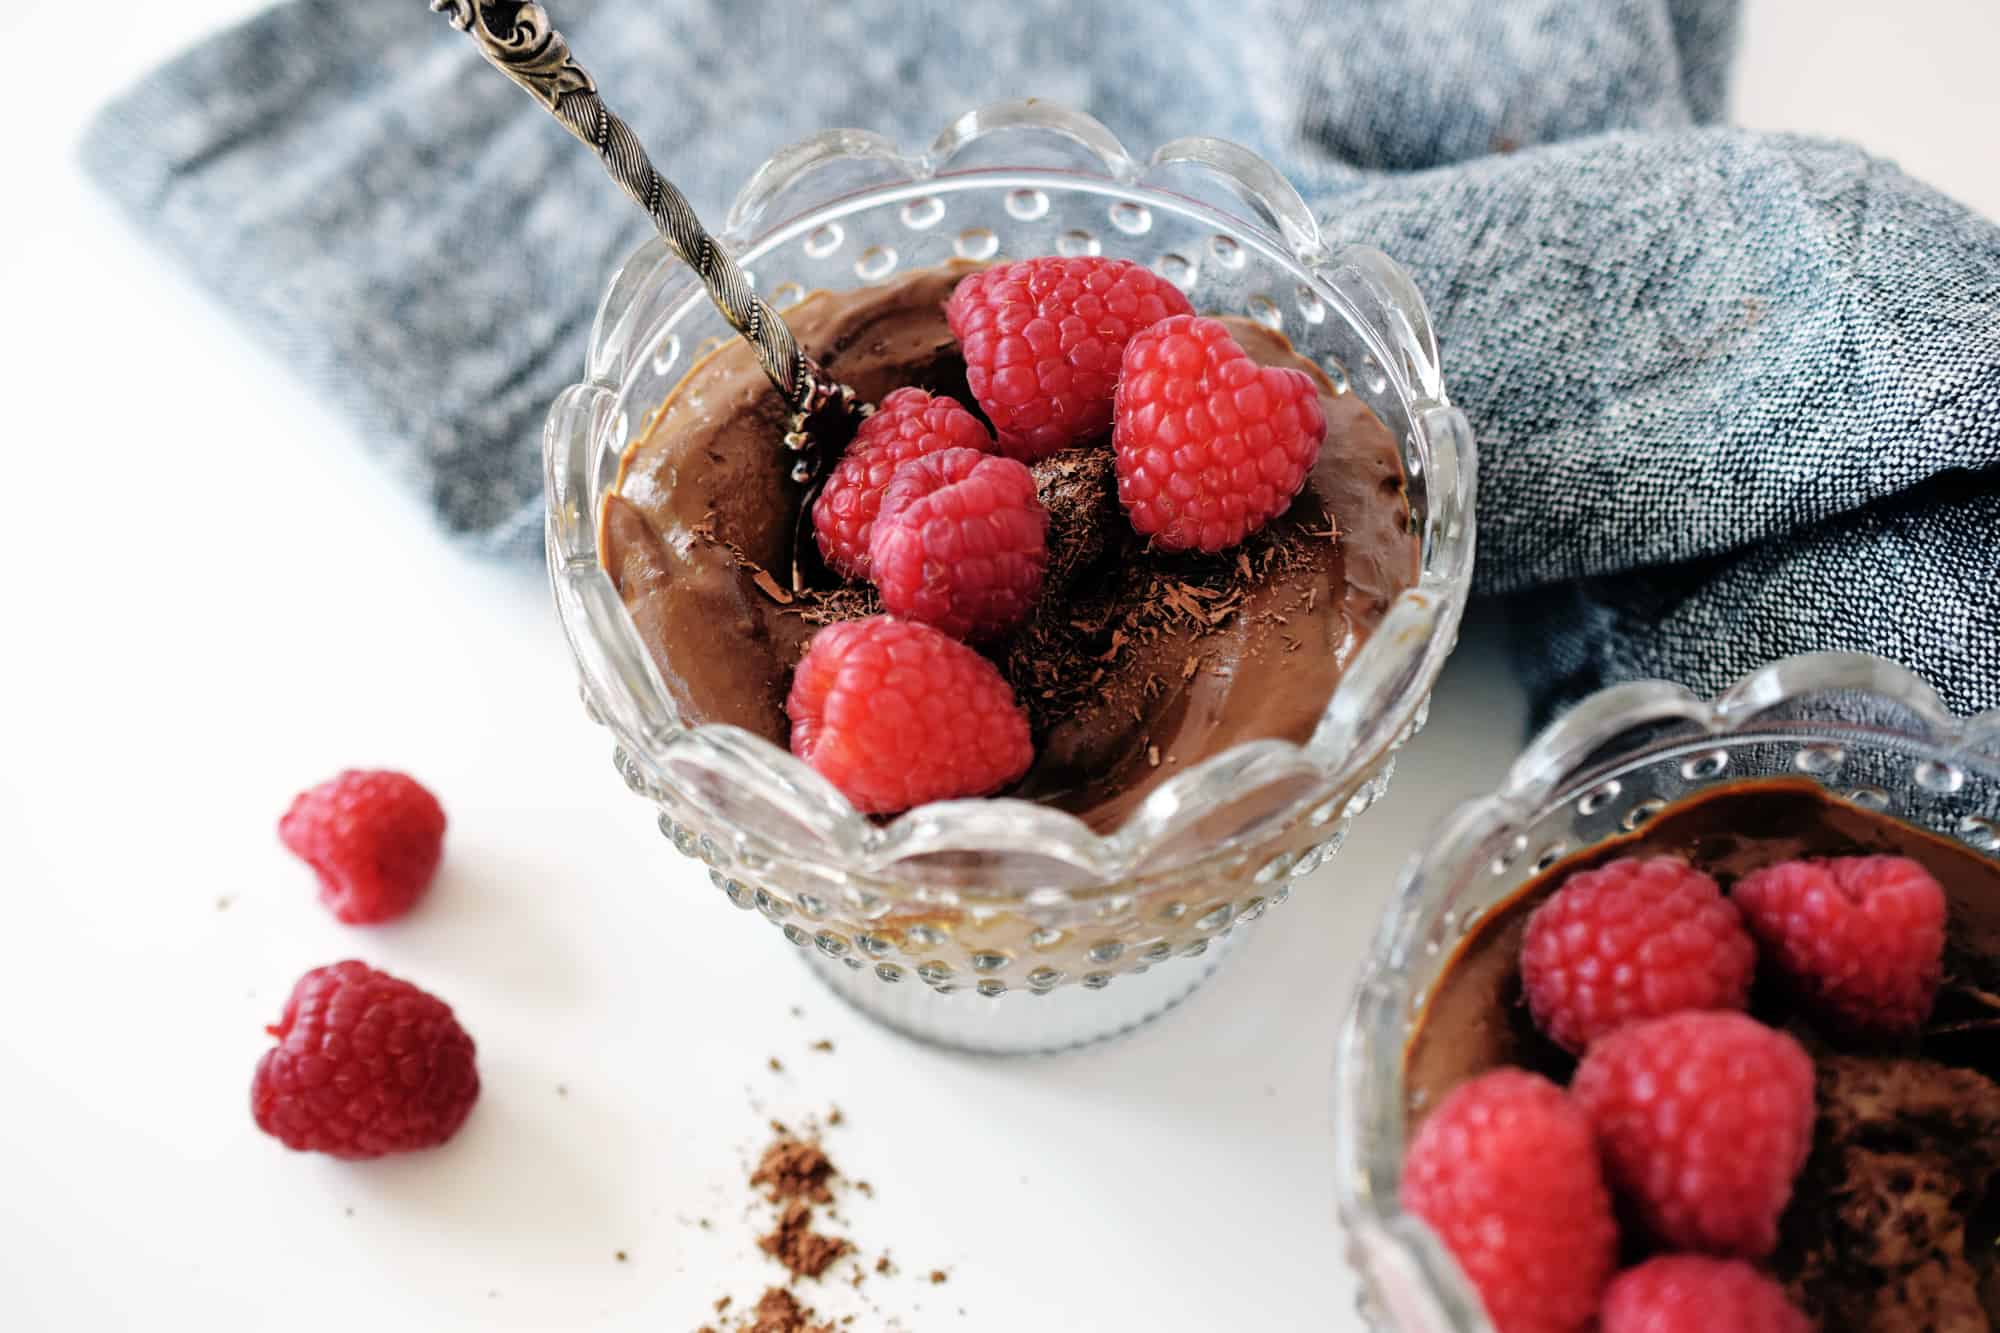 chocolate mousse in two glass bowls with fresh raspberries on top and spoon. Grey napkin in background